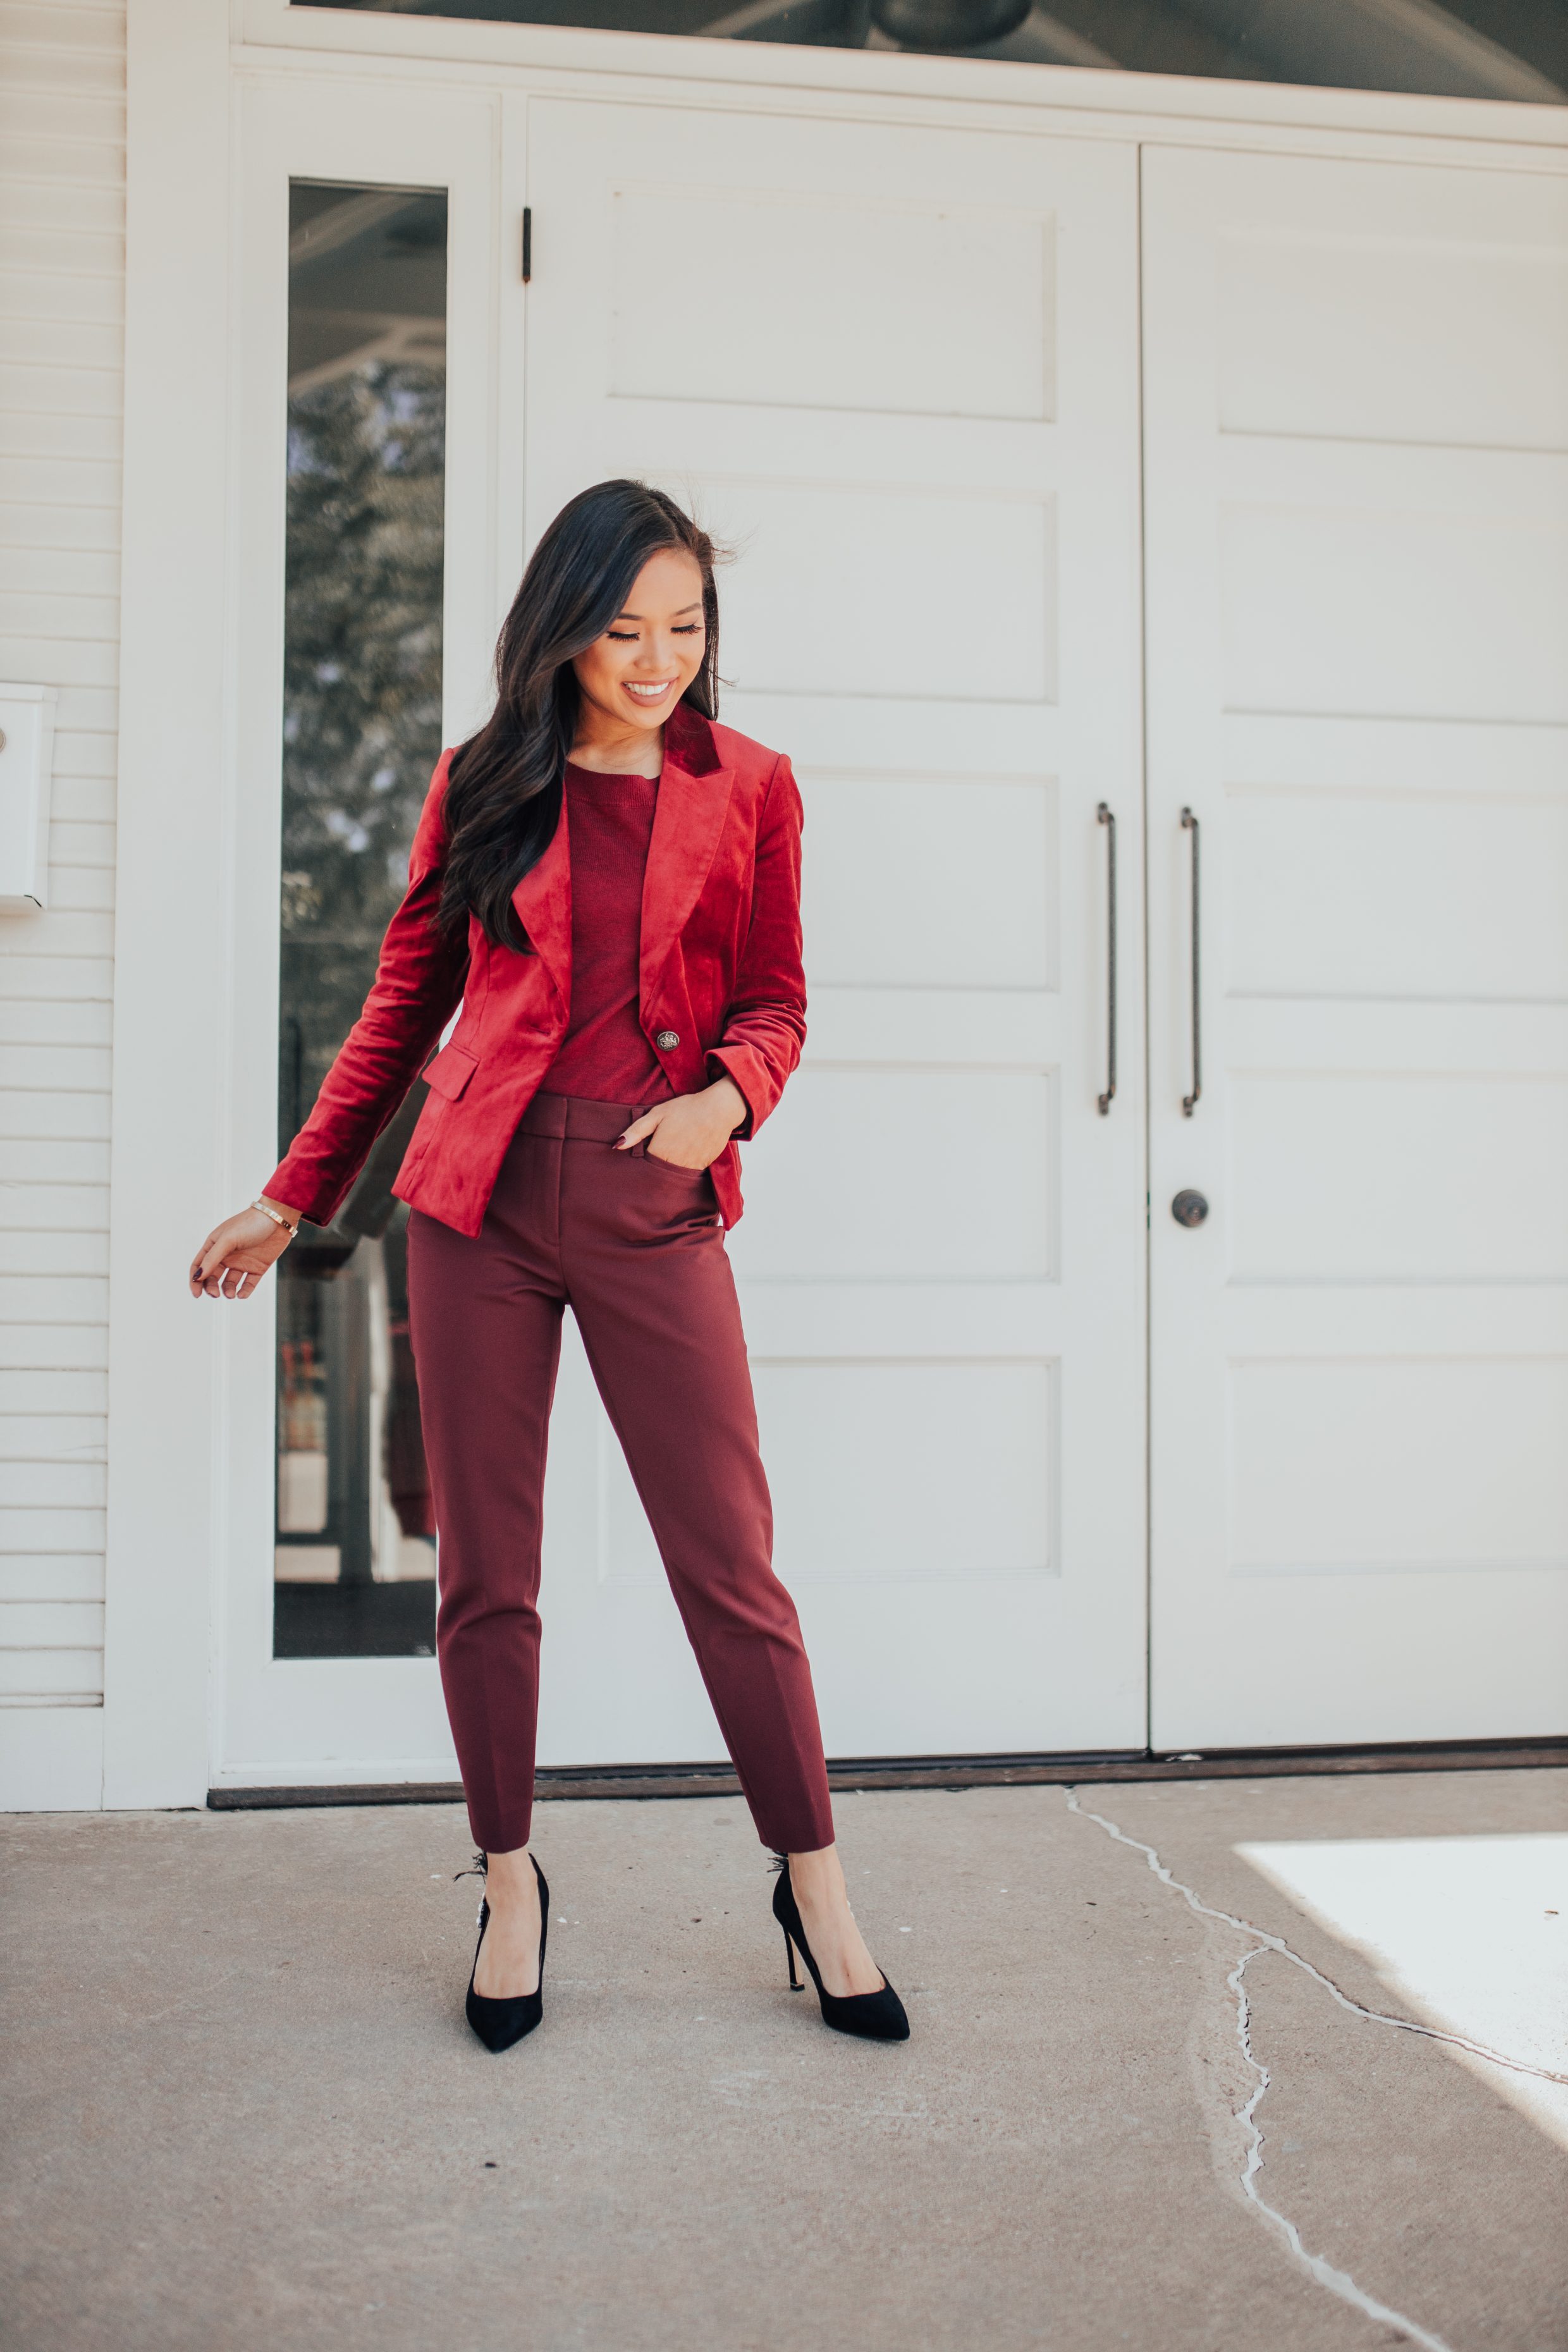 Red velvet blazer work outfit ideas for the holidays on petite blogger Hoang-Kim